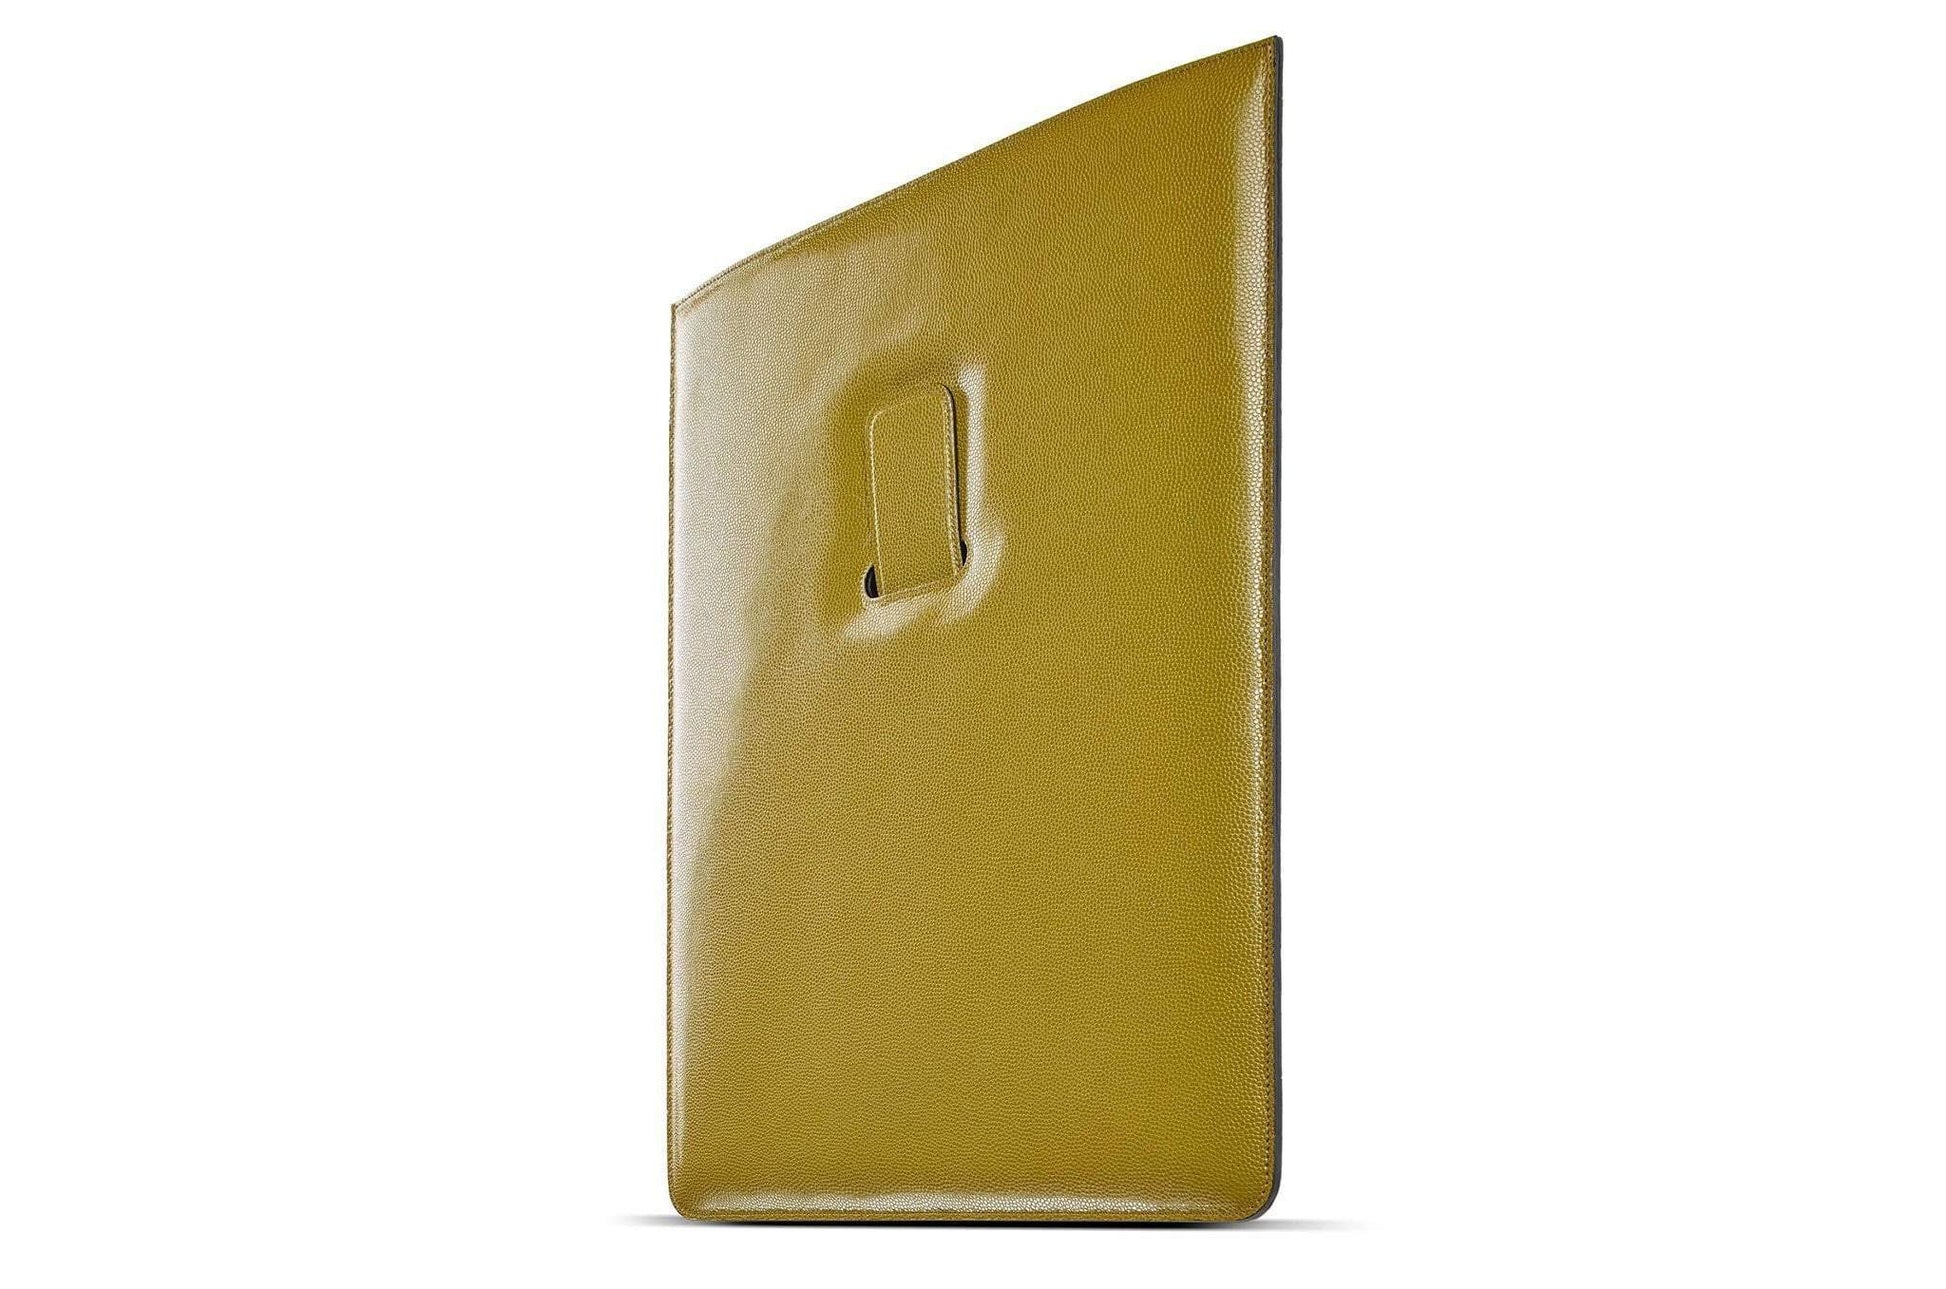 Artisanal Bags Olive Leather iPad Sleeve - Multiple Colors A799112